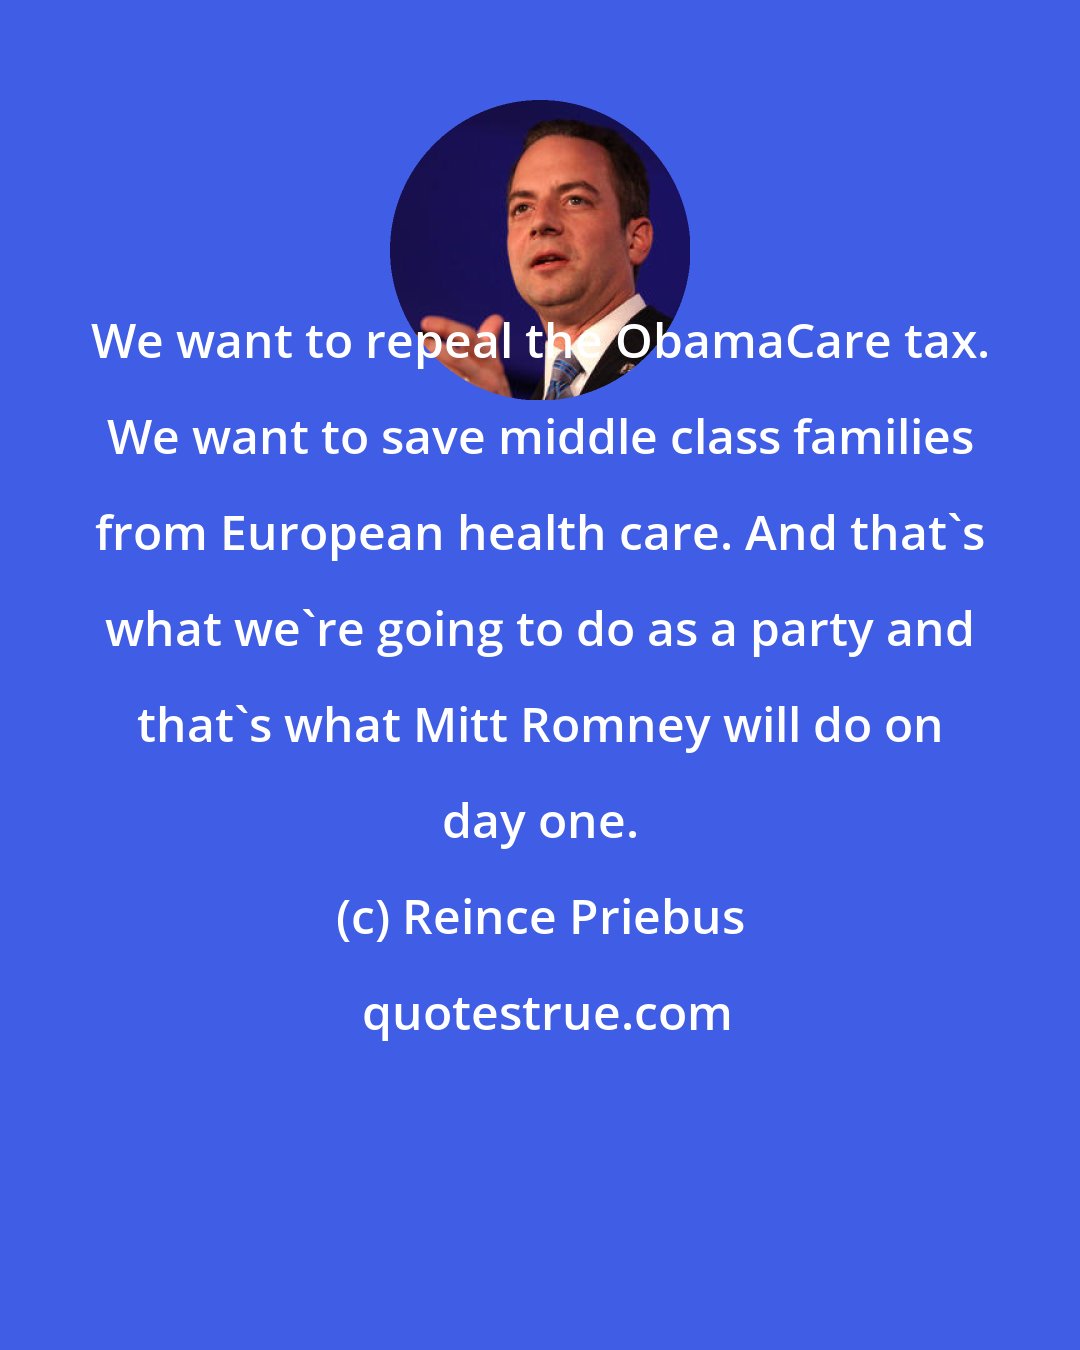 Reince Priebus: We want to repeal the ObamaCare tax. We want to save middle class families from European health care. And that's what we're going to do as a party and that's what Mitt Romney will do on day one.